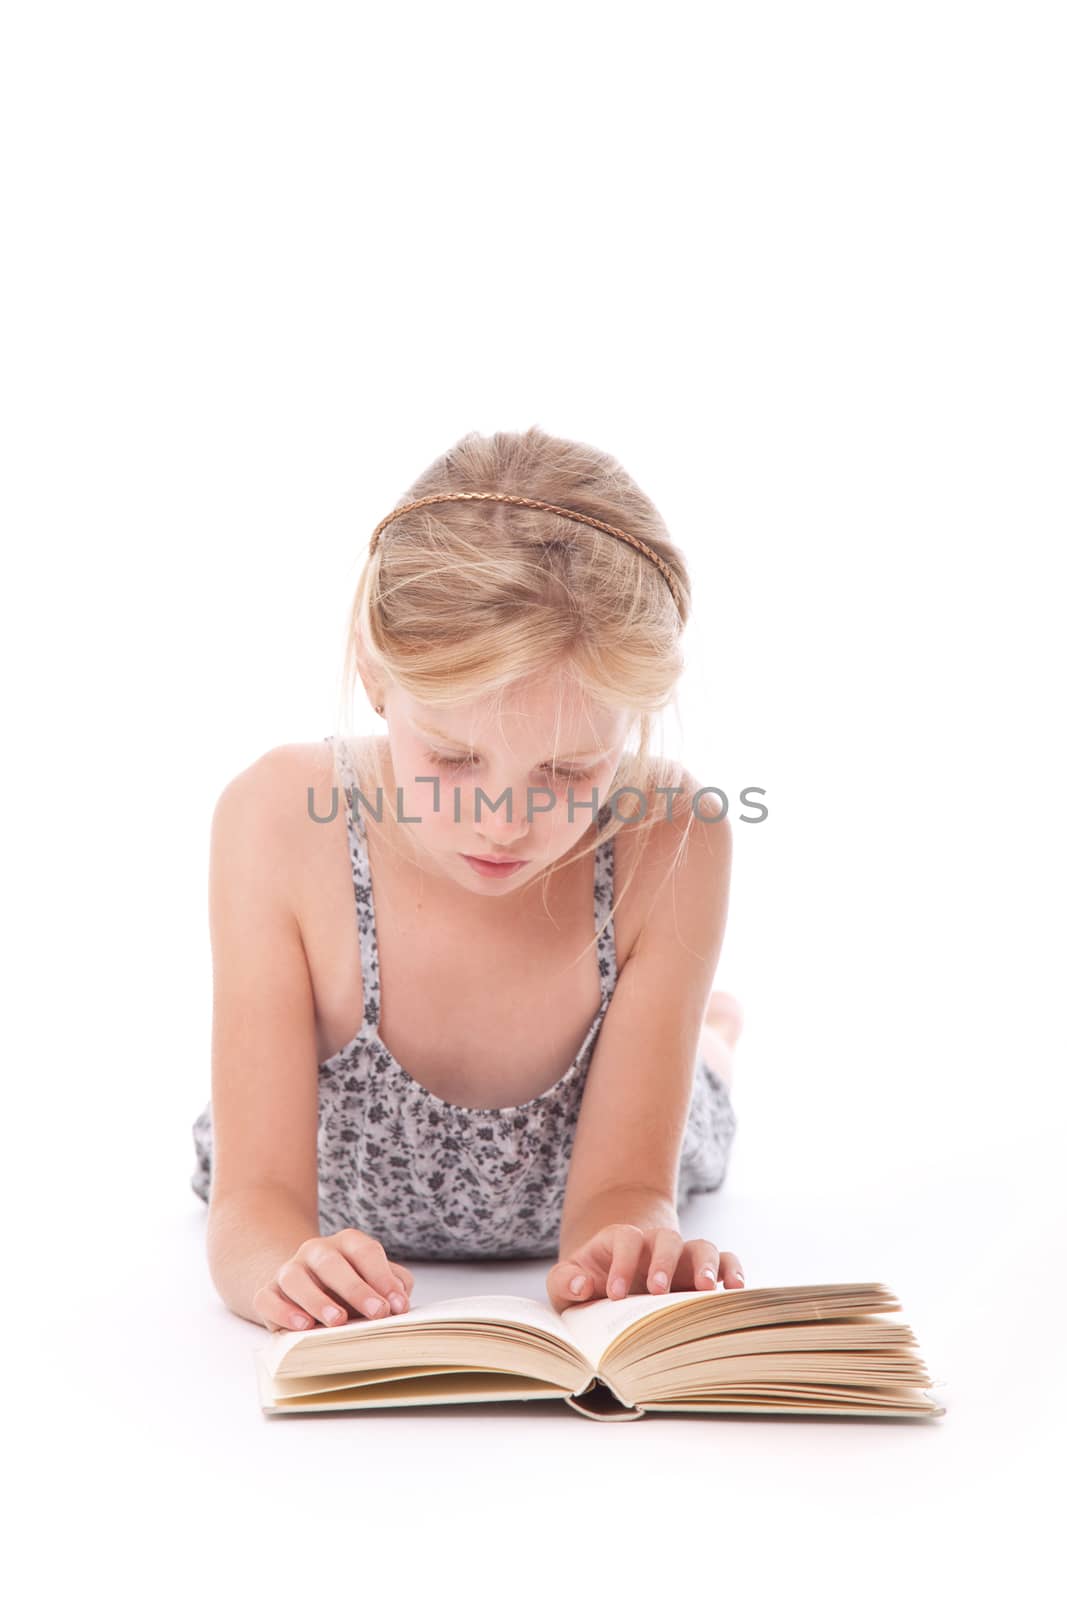 young girl reading a book against white background by ahavelaar